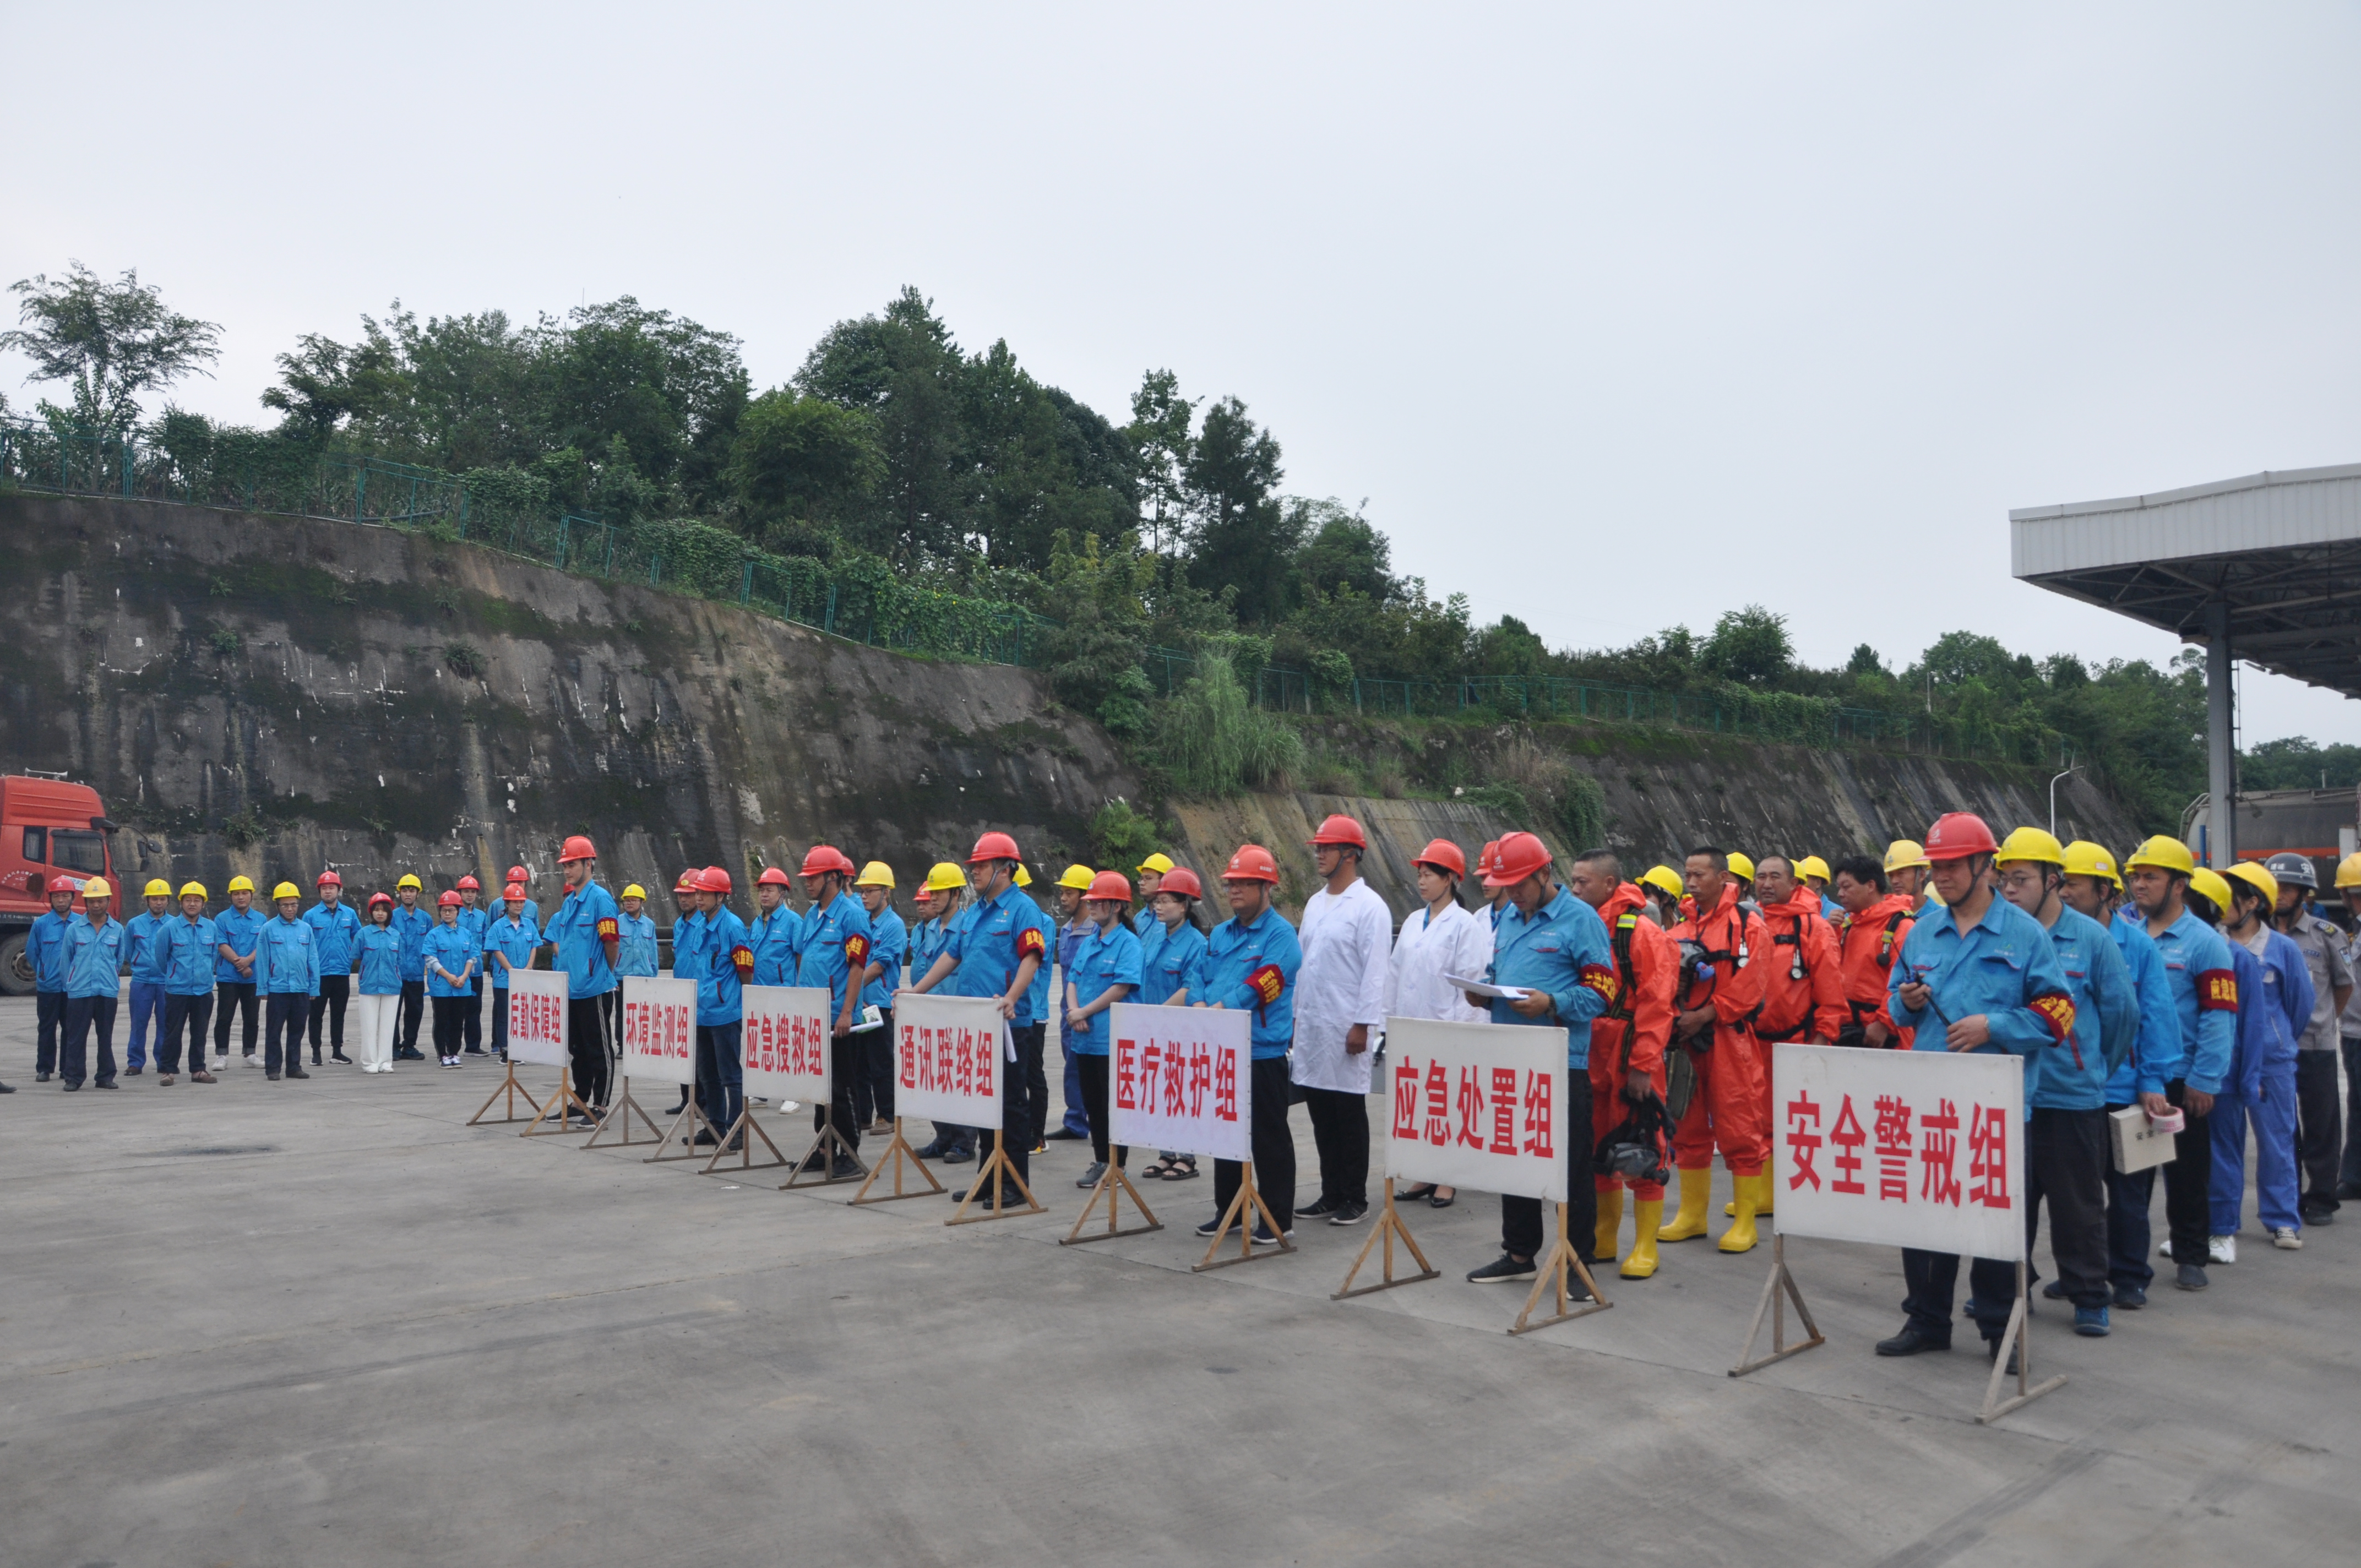 Sichuan Xinda New Energy Technology Co., Ltd. organizes emergency rescue drills for hazardous chemical spills in 2020